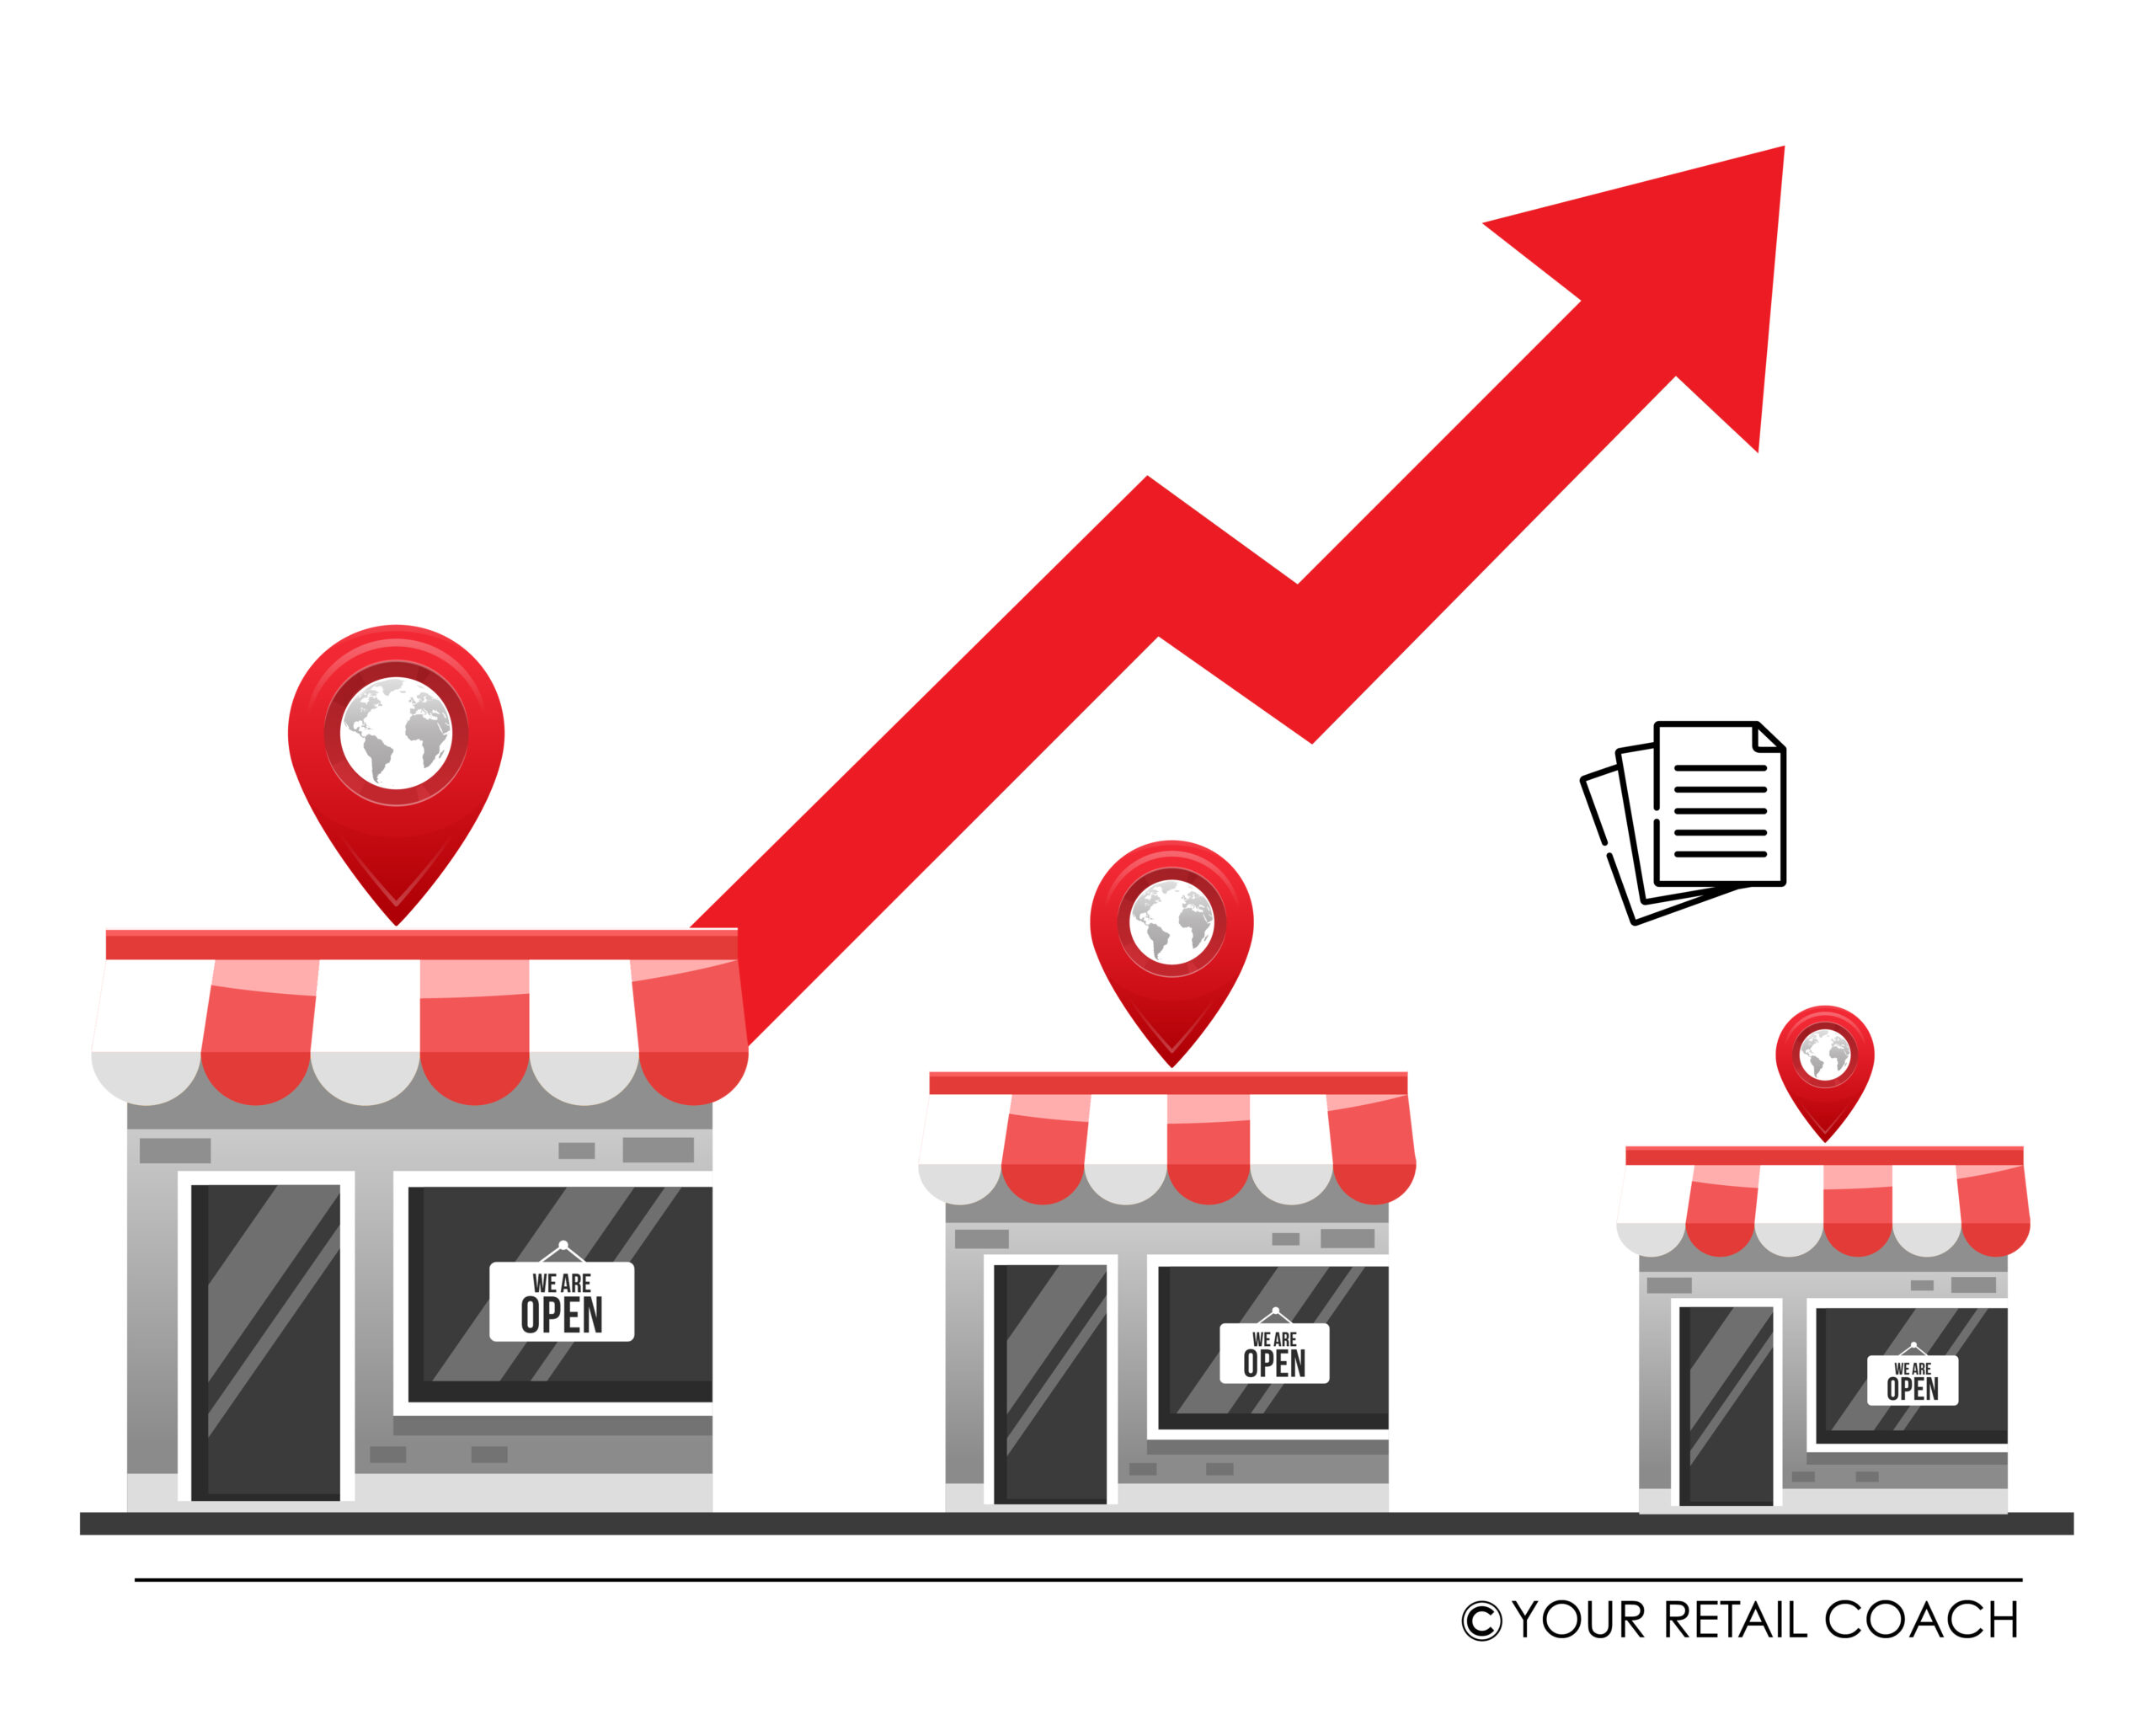 How to Improve Retail Store Operations to Expand from 10 to 50 Stores